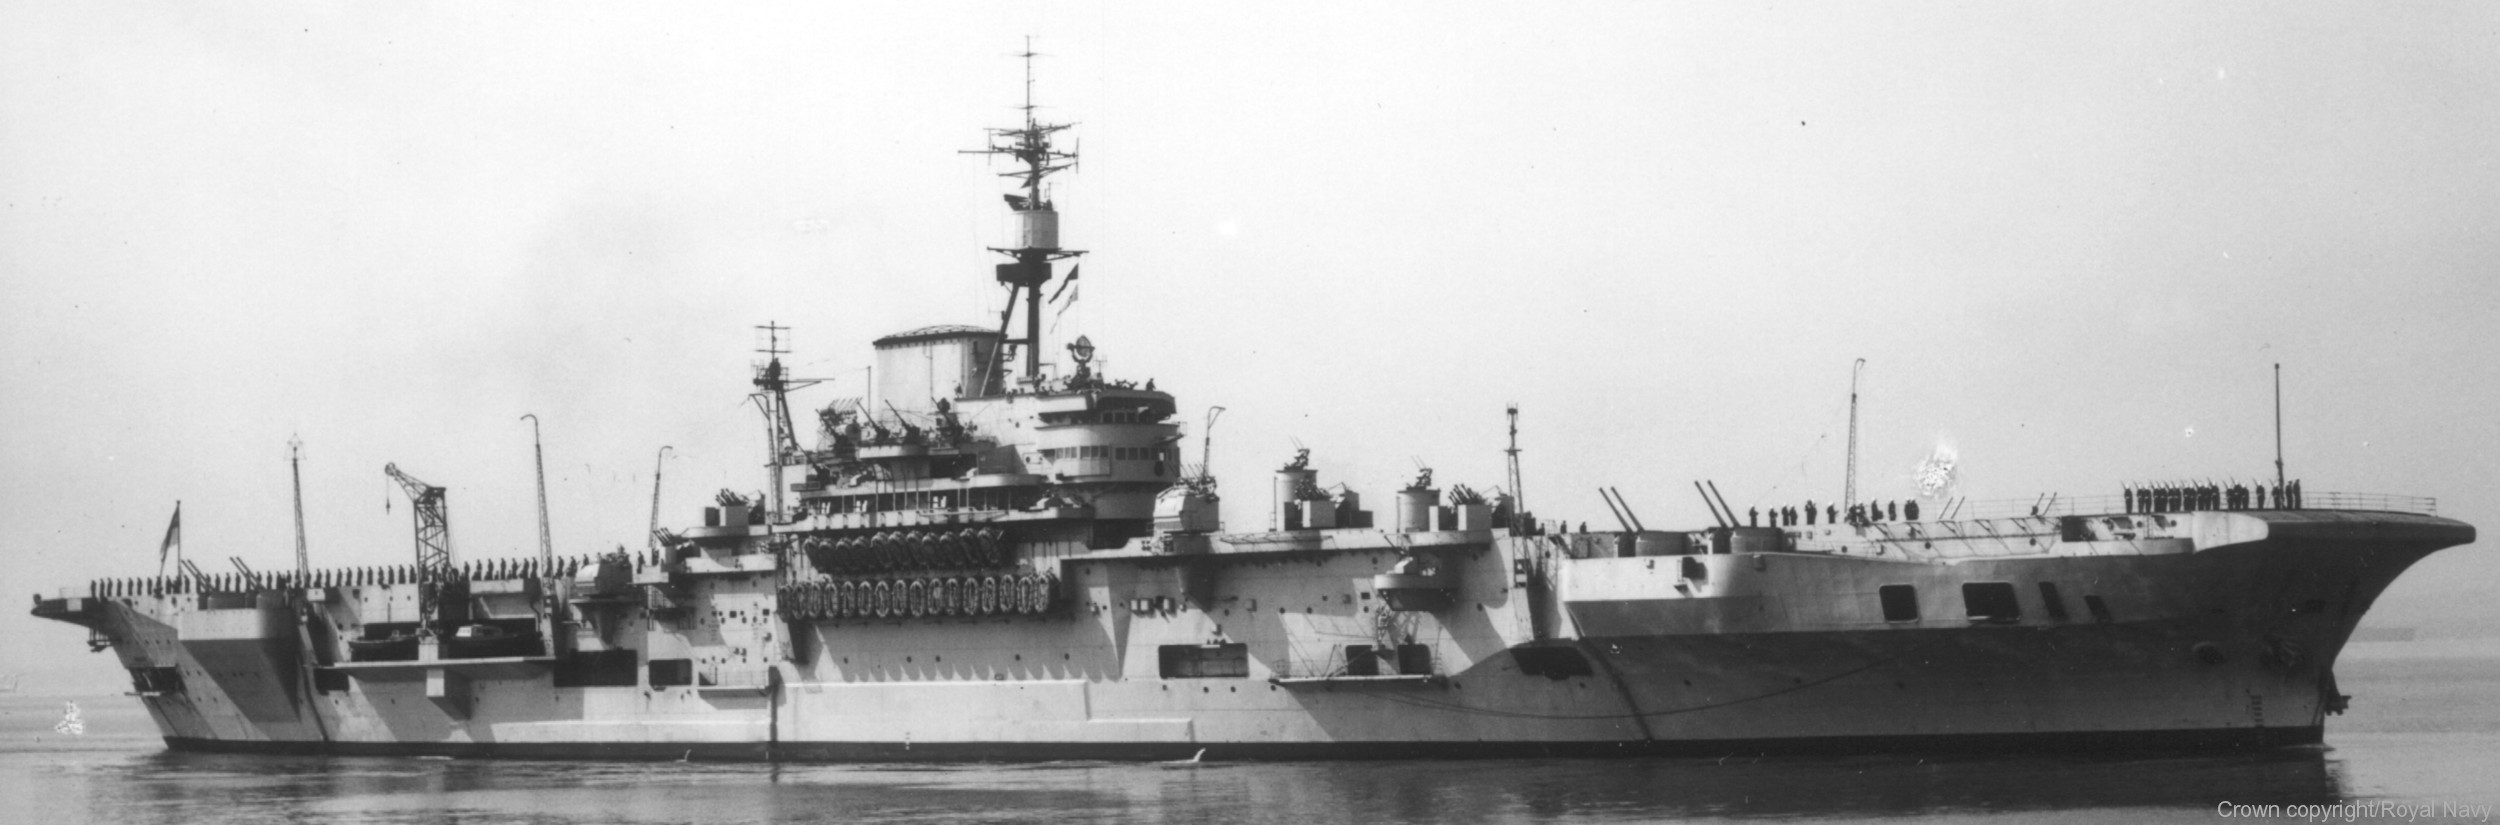 r-86 hms implaceable aircraft carrier royal navy 02